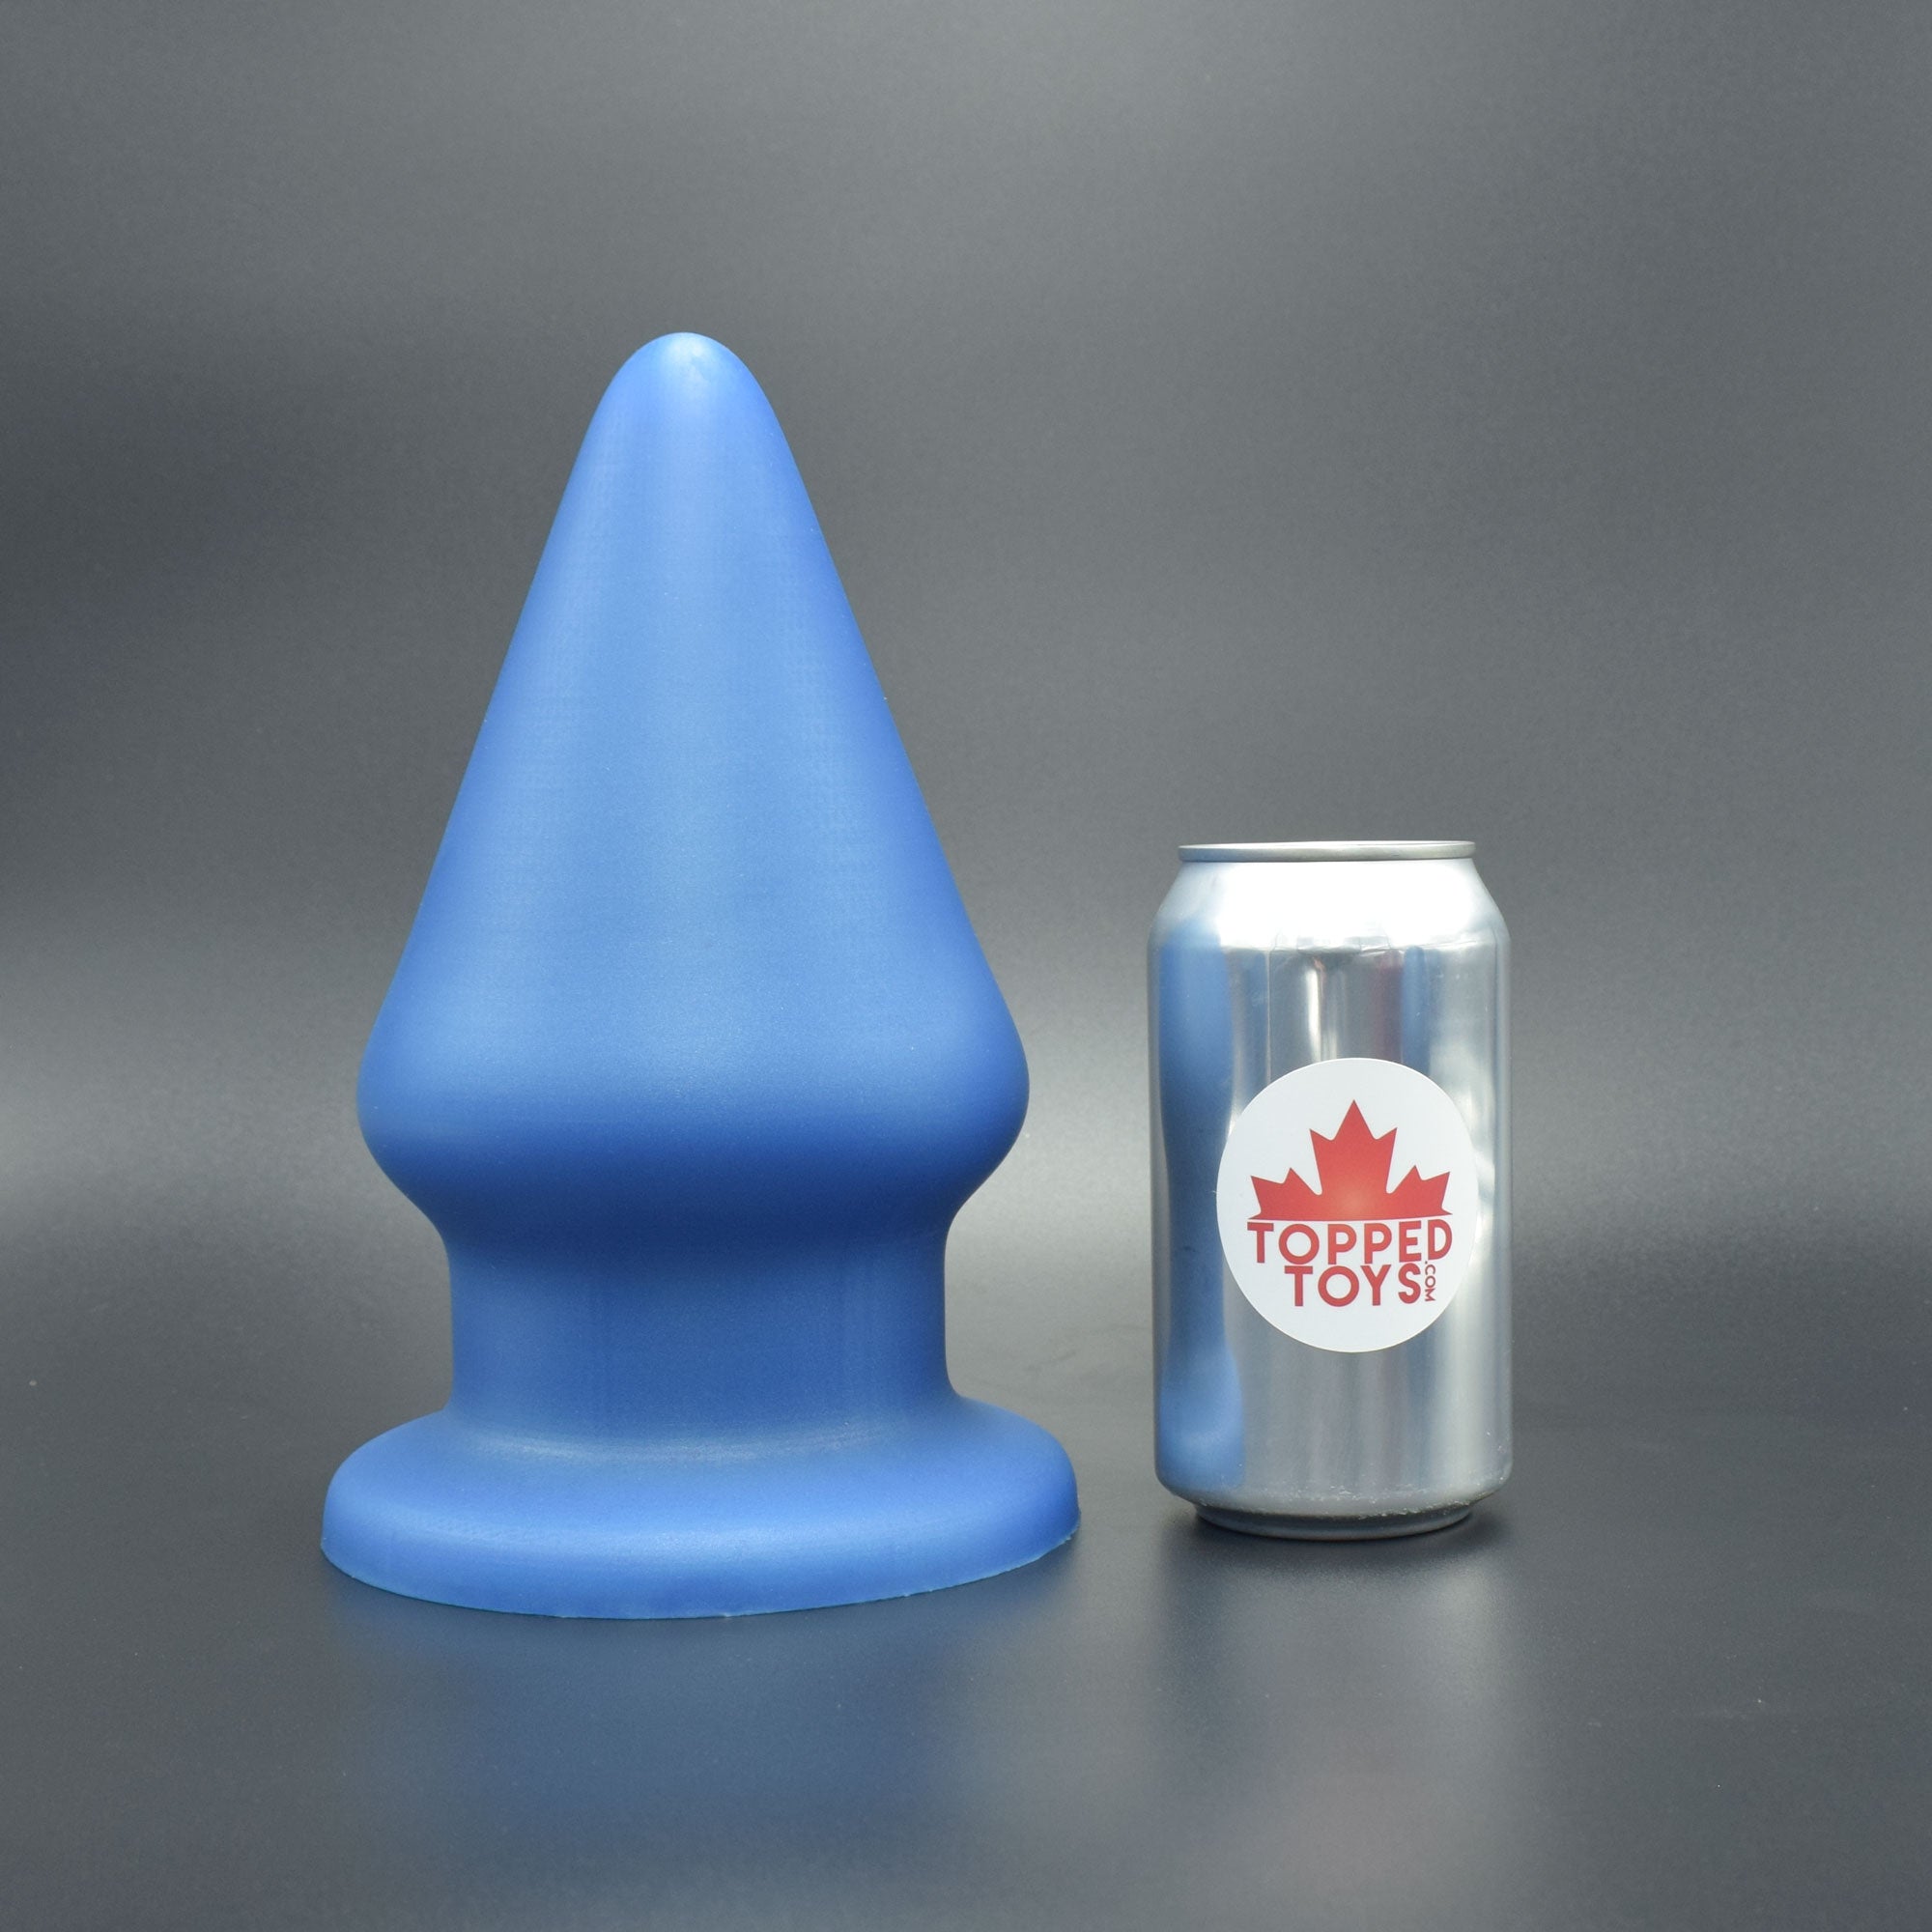 Grip 150 in Blue Steel, next to pop can with Topped Toys logo